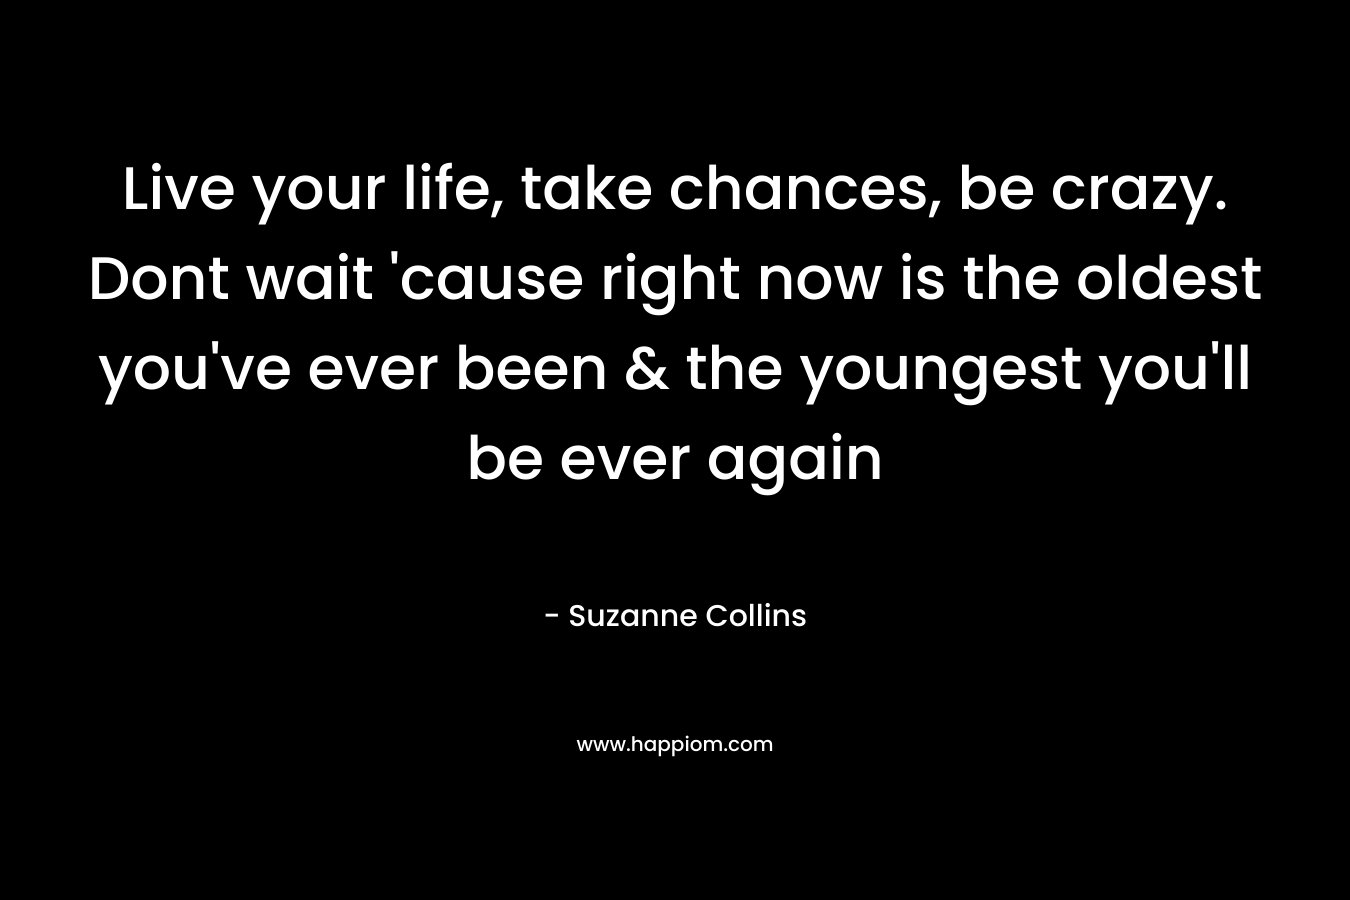 Live your life, take chances, be crazy. Dont wait 'cause right now is the oldest you've ever been & the youngest you'll be ever again